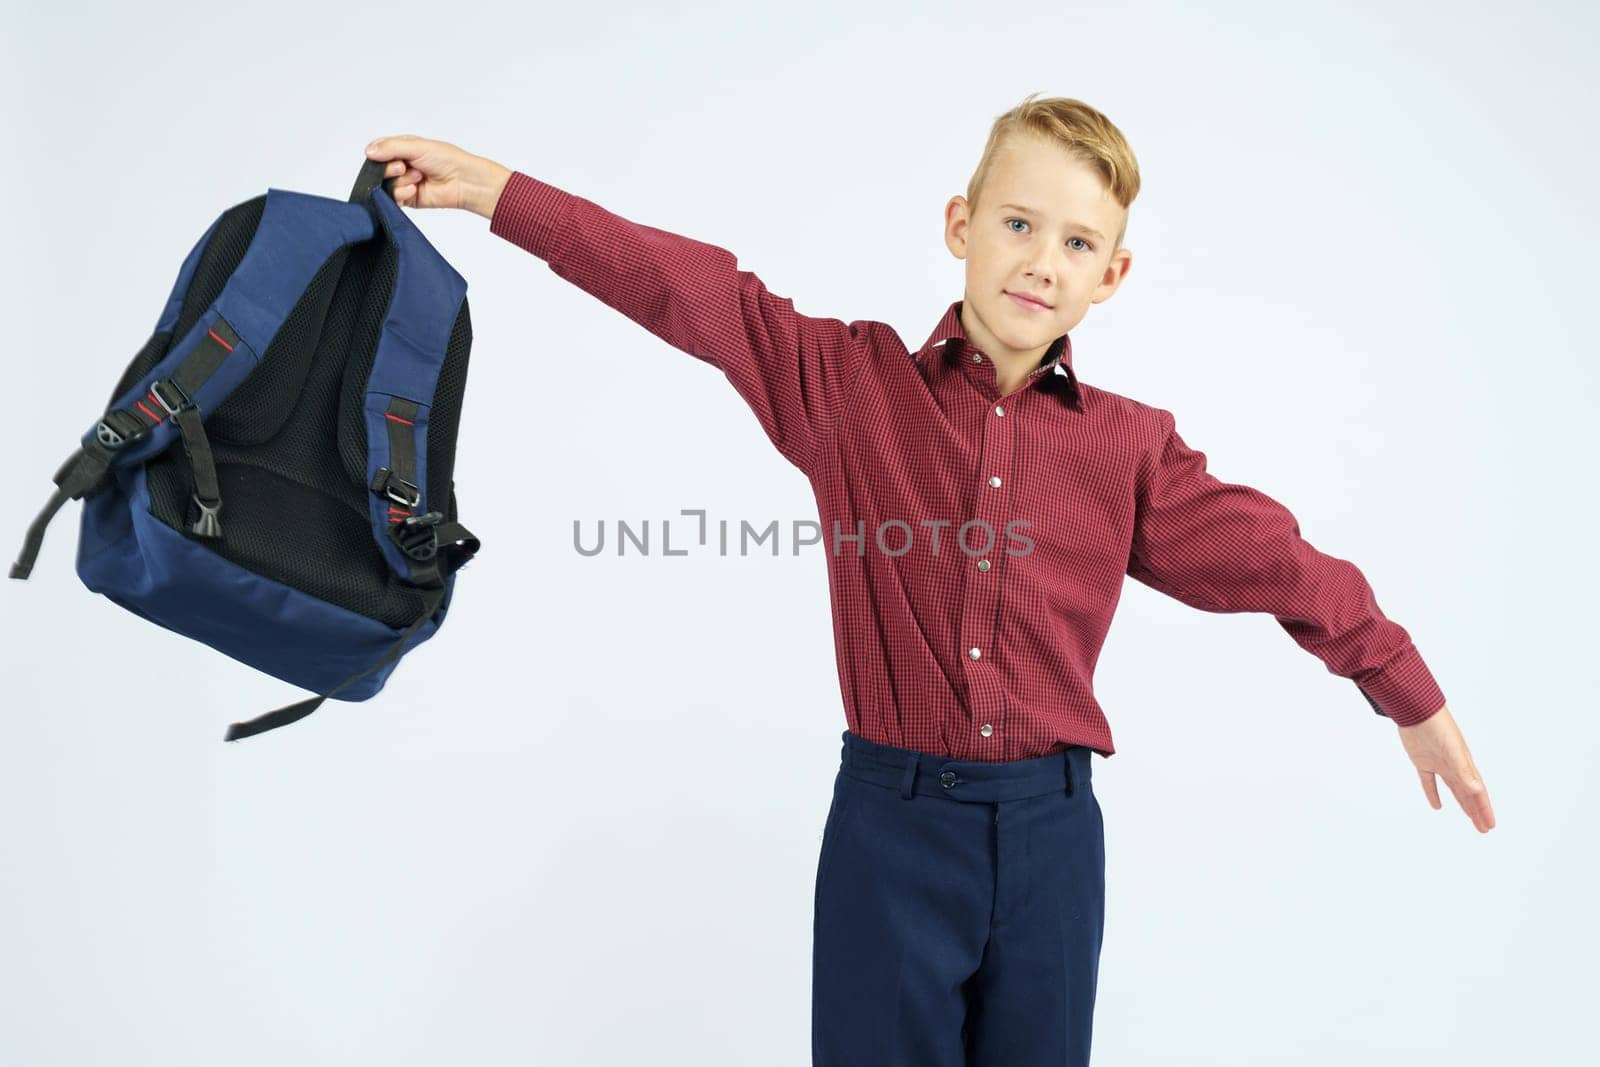 A schoolboy holds a schoolbag over his head. by Sd28DimoN_1976